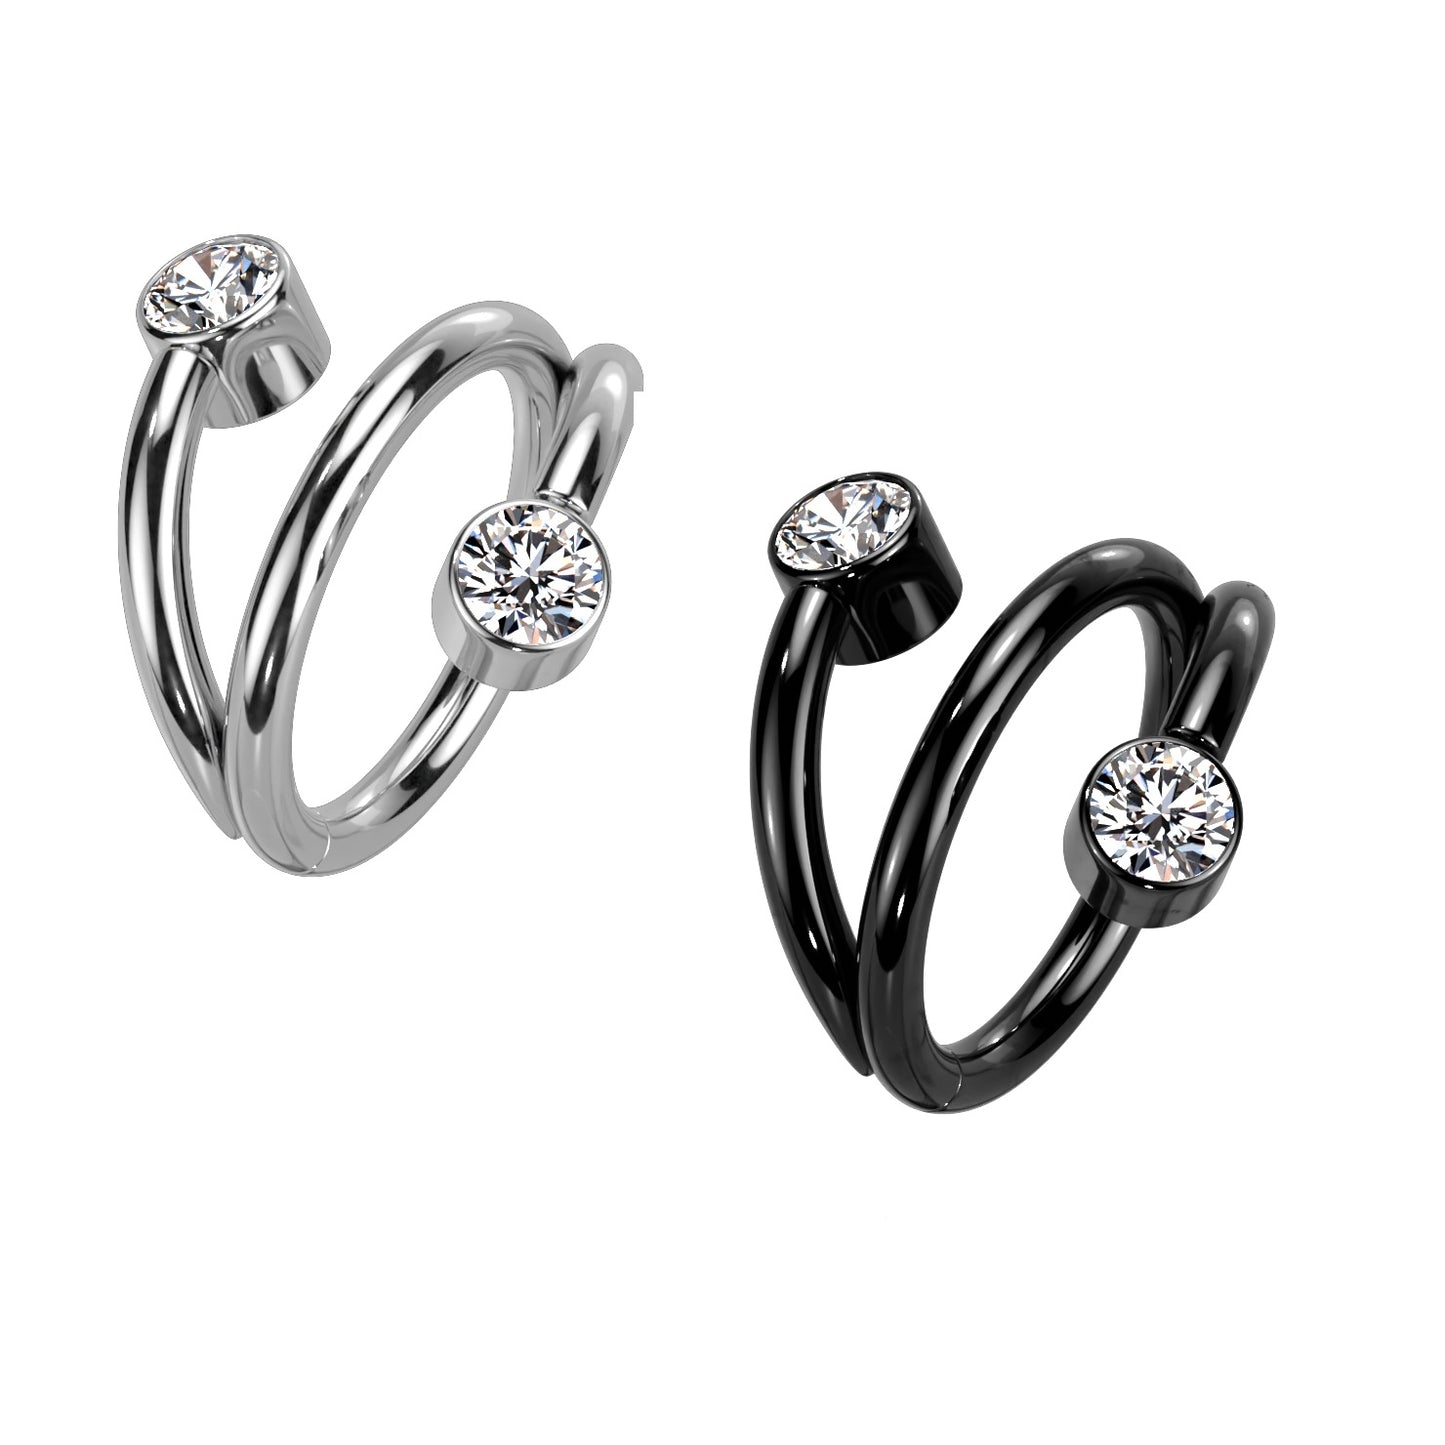 Titanium hinged segment ring with a triple-look hoop and 2 cubic zirconia gems. Great for septum, daith, rook, helix, tragus.  Ti-6AL4V-ELi ASTM F-136  *IMPLANT GRADE   Available in 2 different diameters, 8mm or 10mm in silver or black..